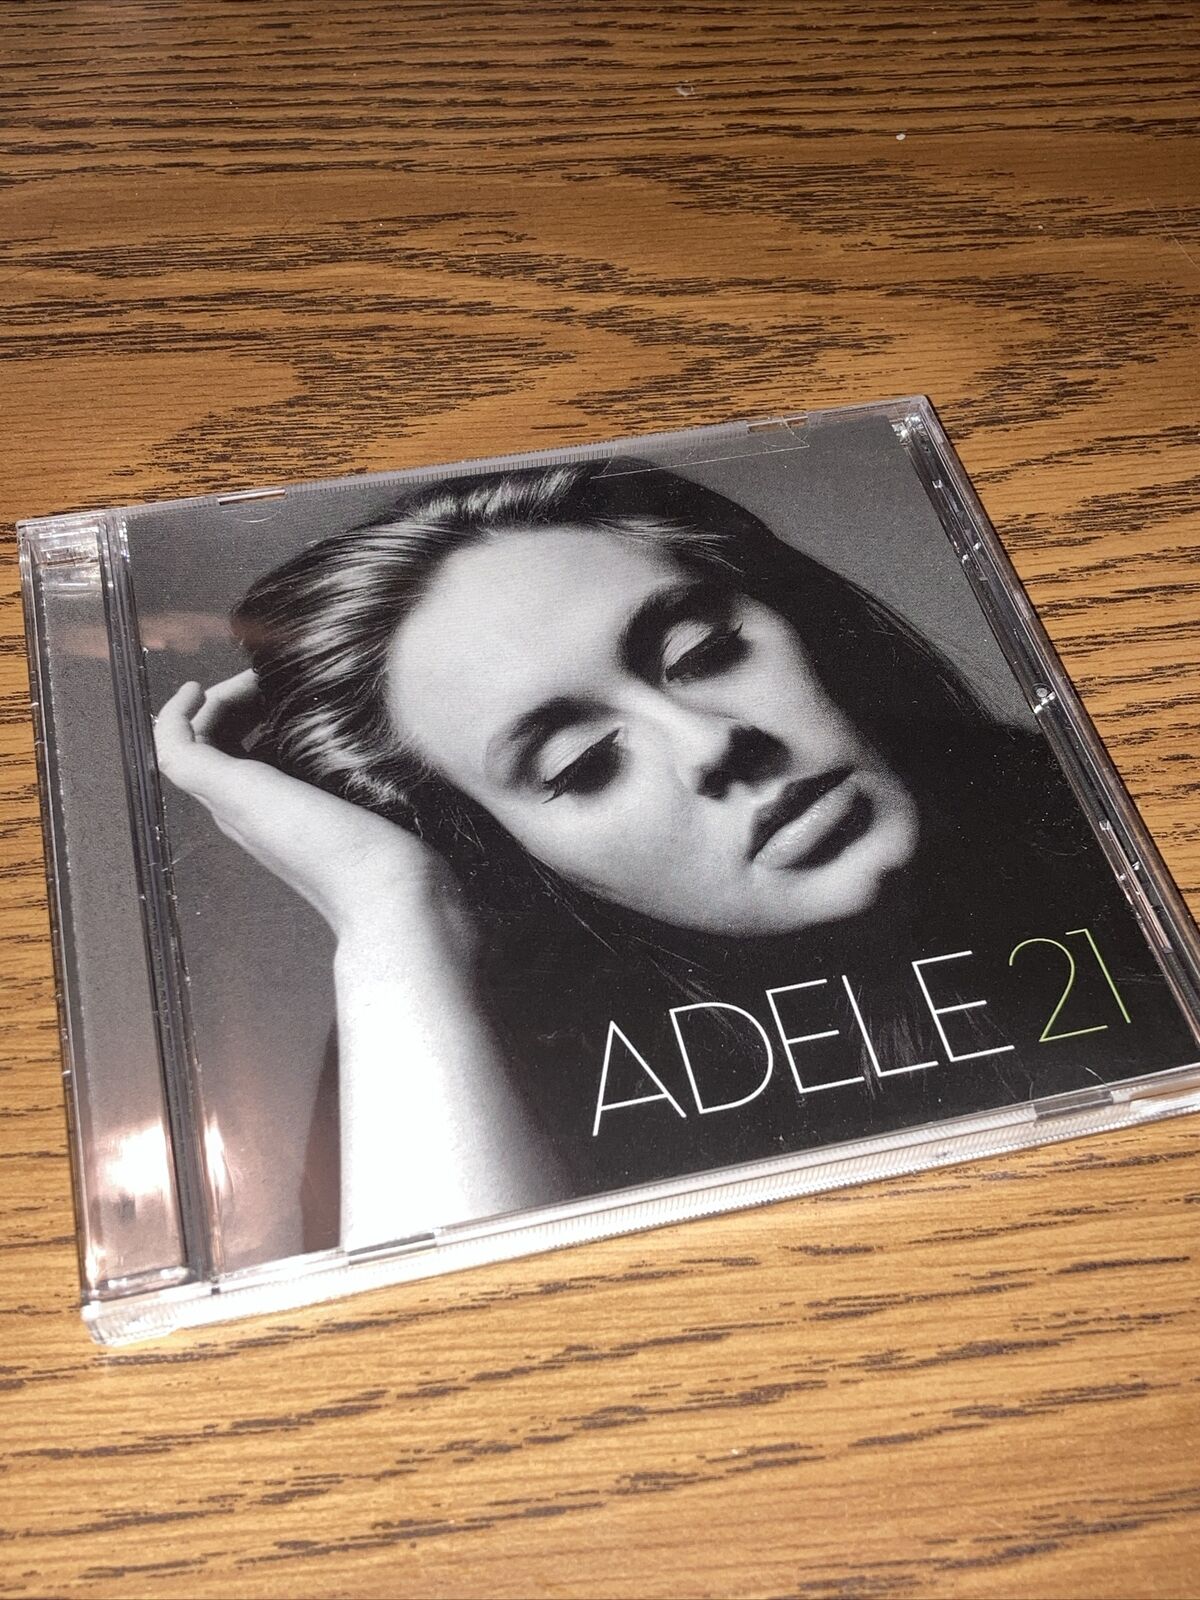 21 by Adele (CD, 2011)